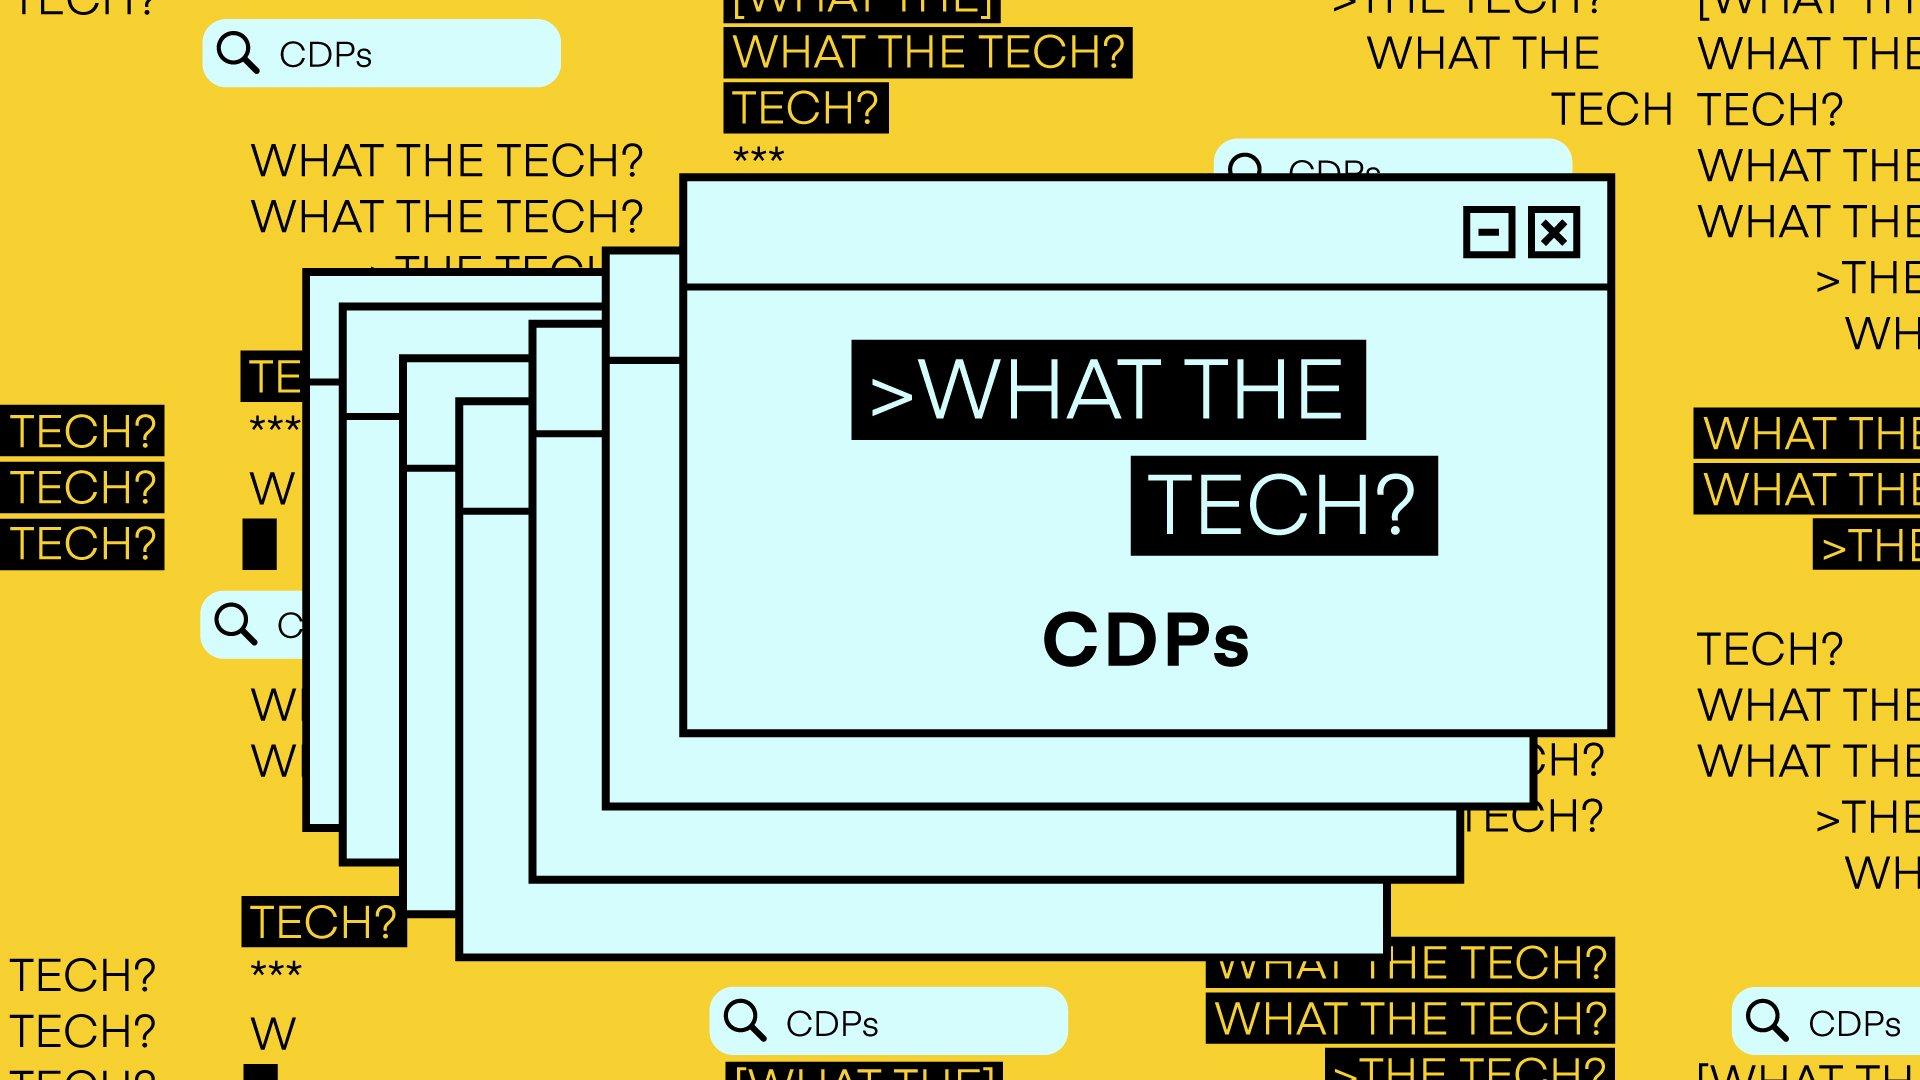 What the Tech are CDPs?